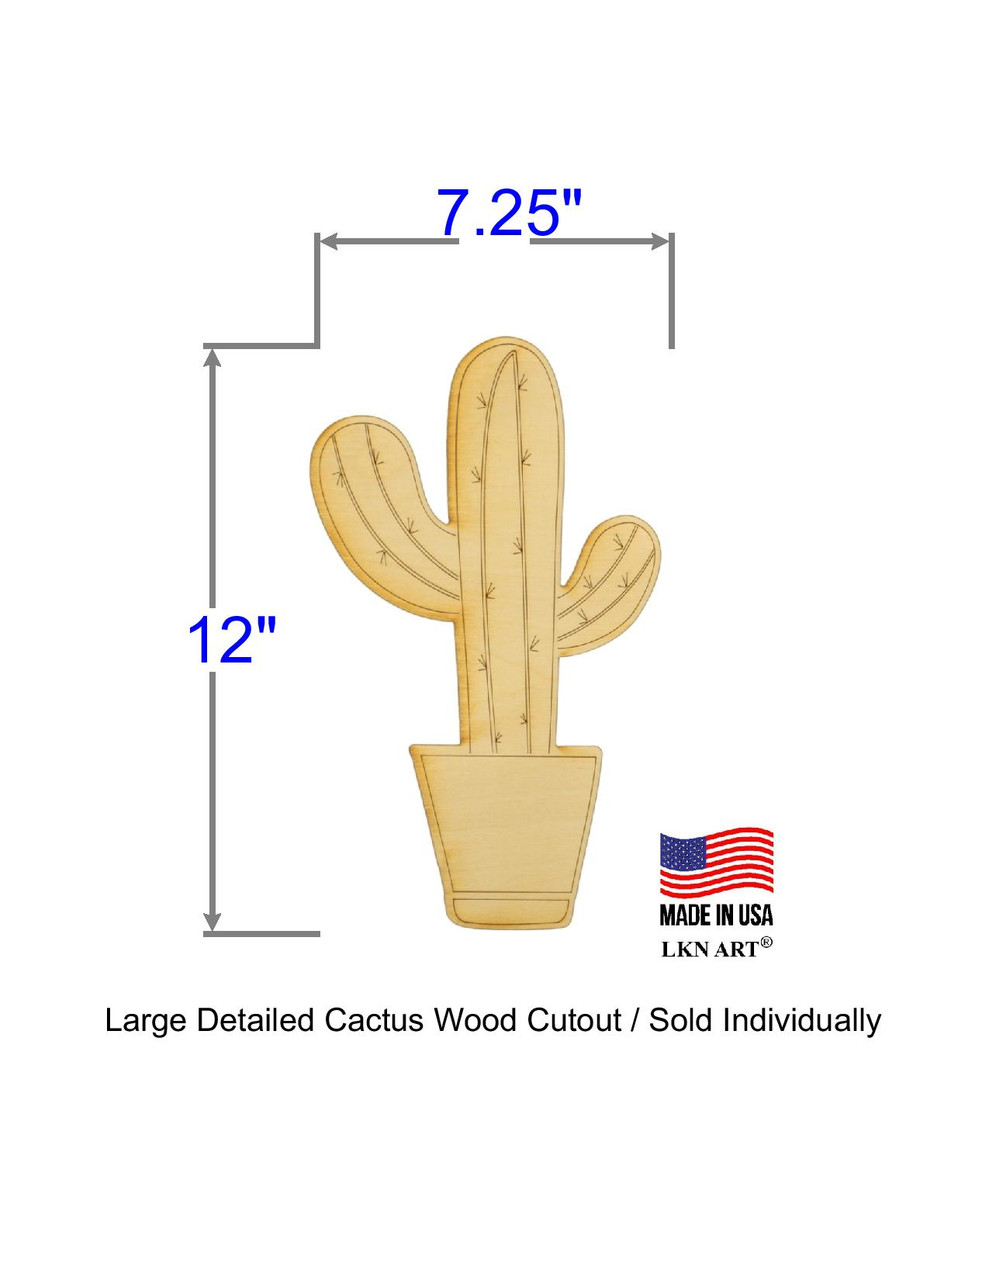 Unfinished Wooden Cactus Cutout, 12 inch, Pack of 1 Wooden Shapes for Crafts and Summer Decor and Crafting, by Woodpeckers, Size: 19